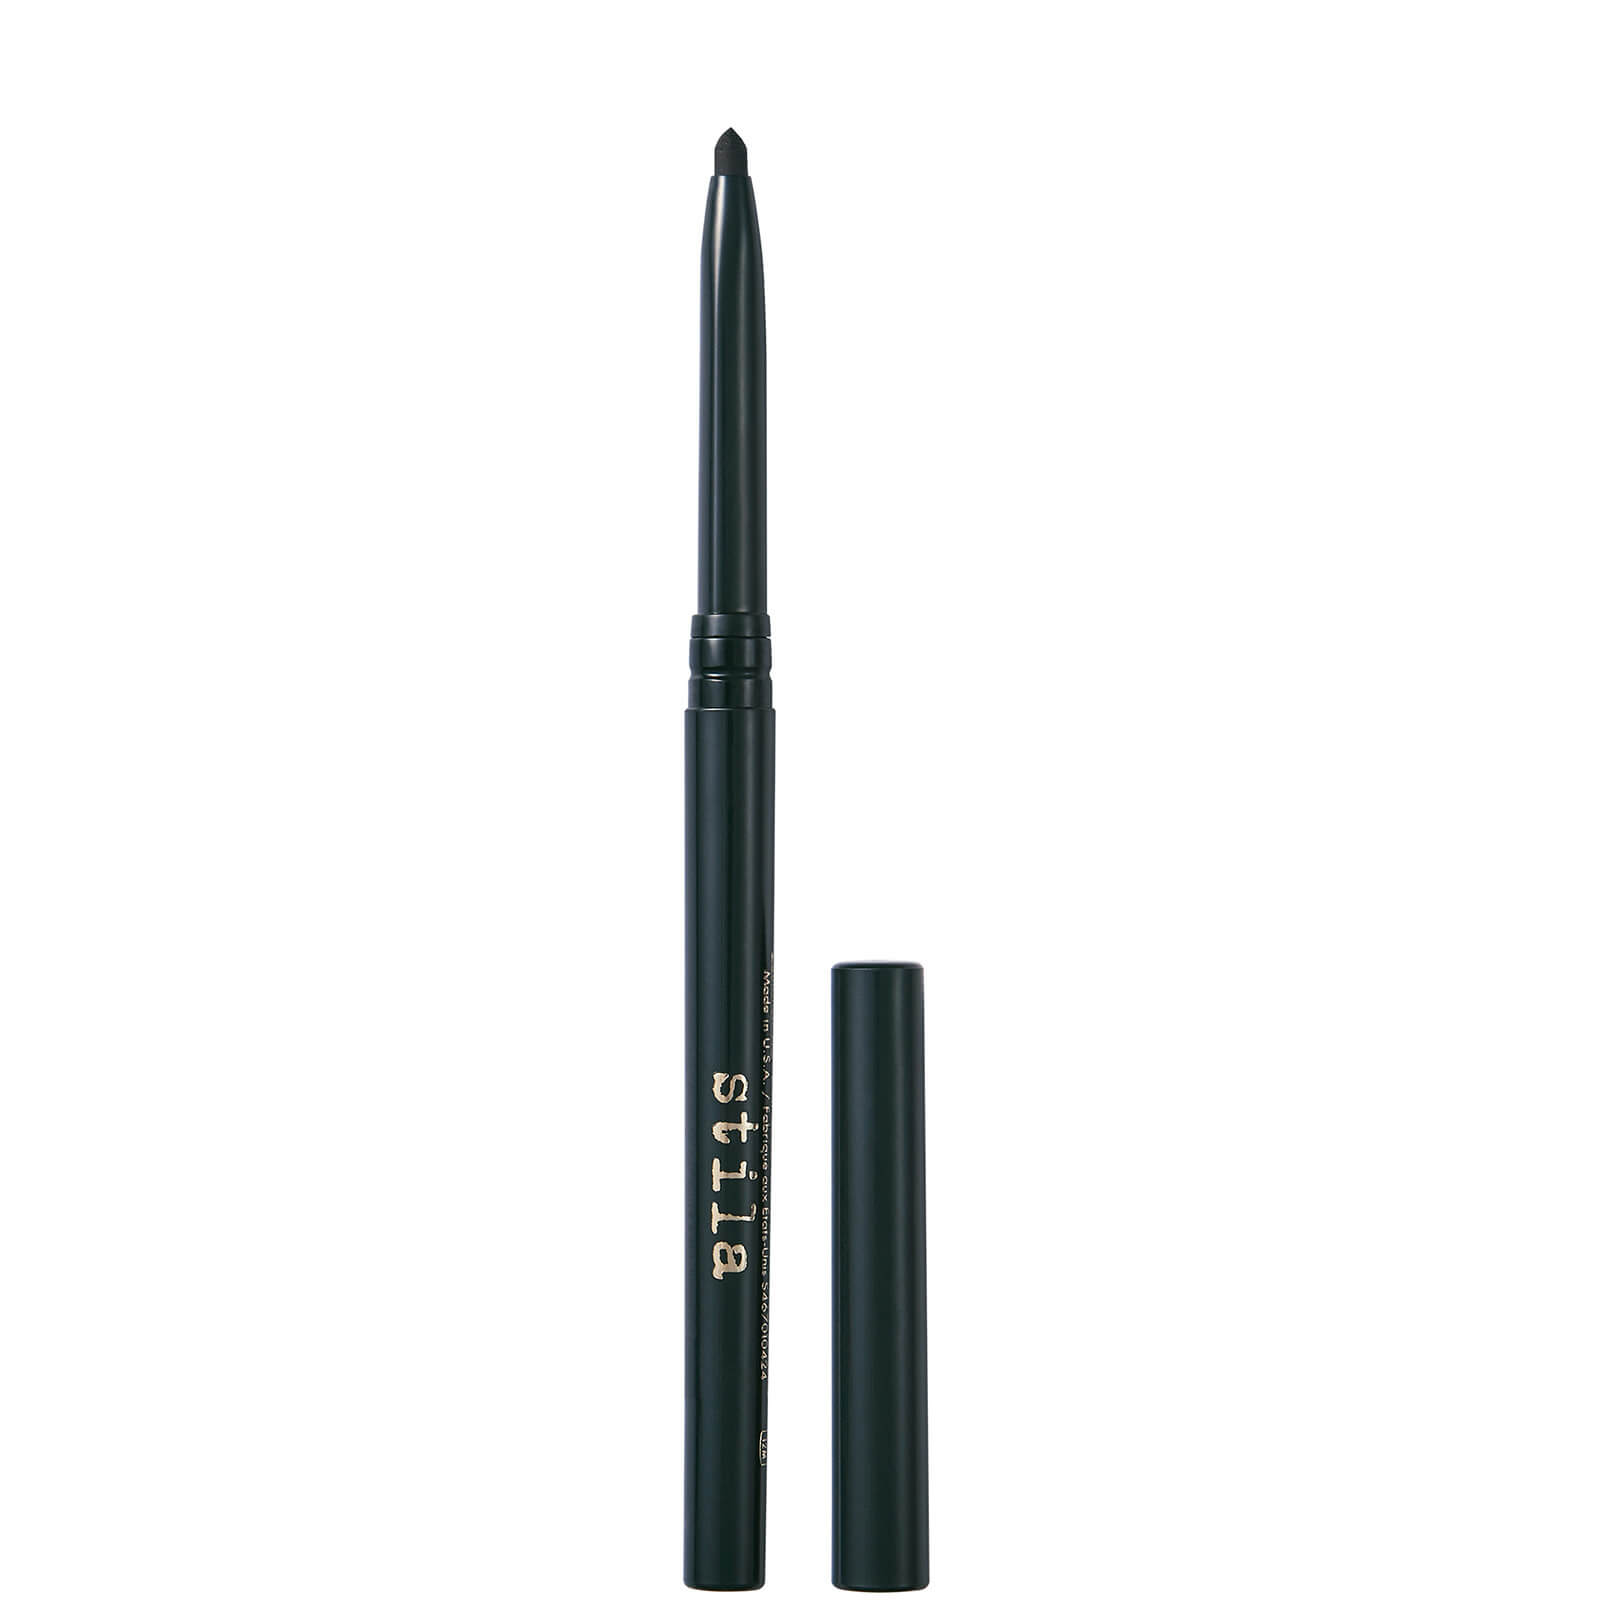 Stila Stay All Day Smudge Stick Waterproof Eye Liner 0.28g (Various Shades) - Jade